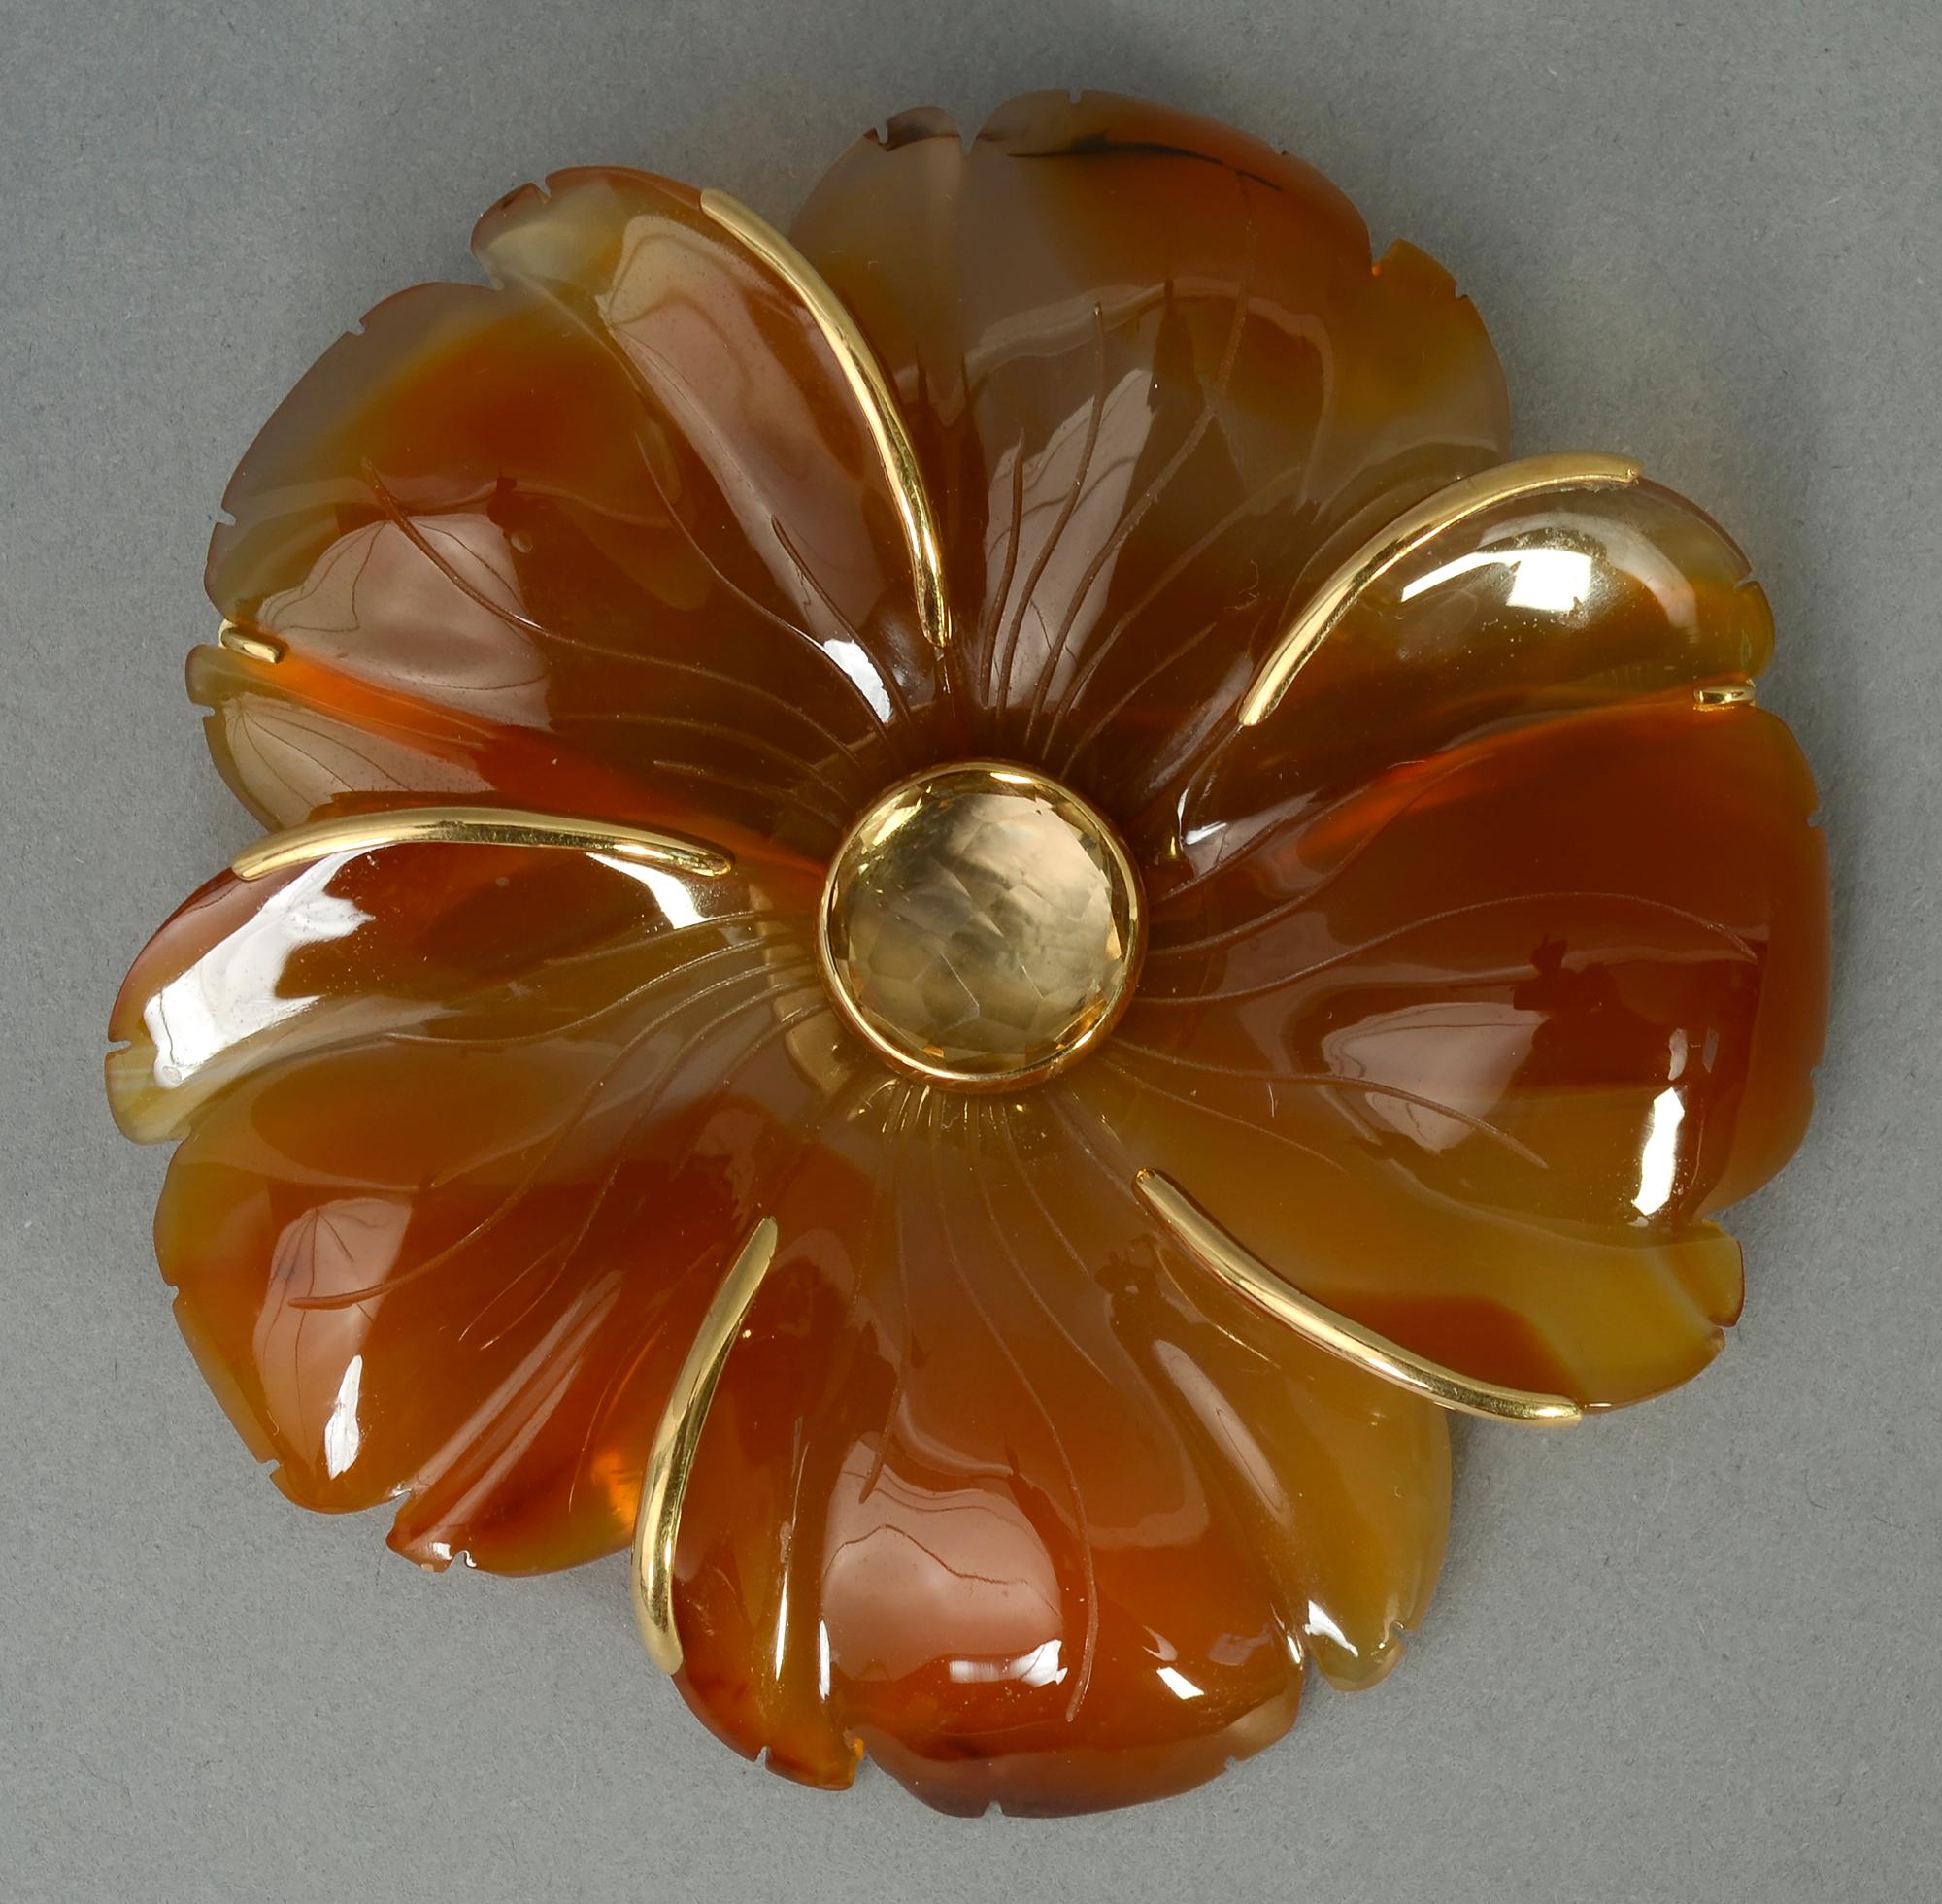 Beautifully carved flower brooch of agate centered with citrine by the late American jewelry designer, Andrew Clunn.
This very three dimensional brooch is carved from one piece of stone. Gold banding highlights the five petals.
This brooch is one of